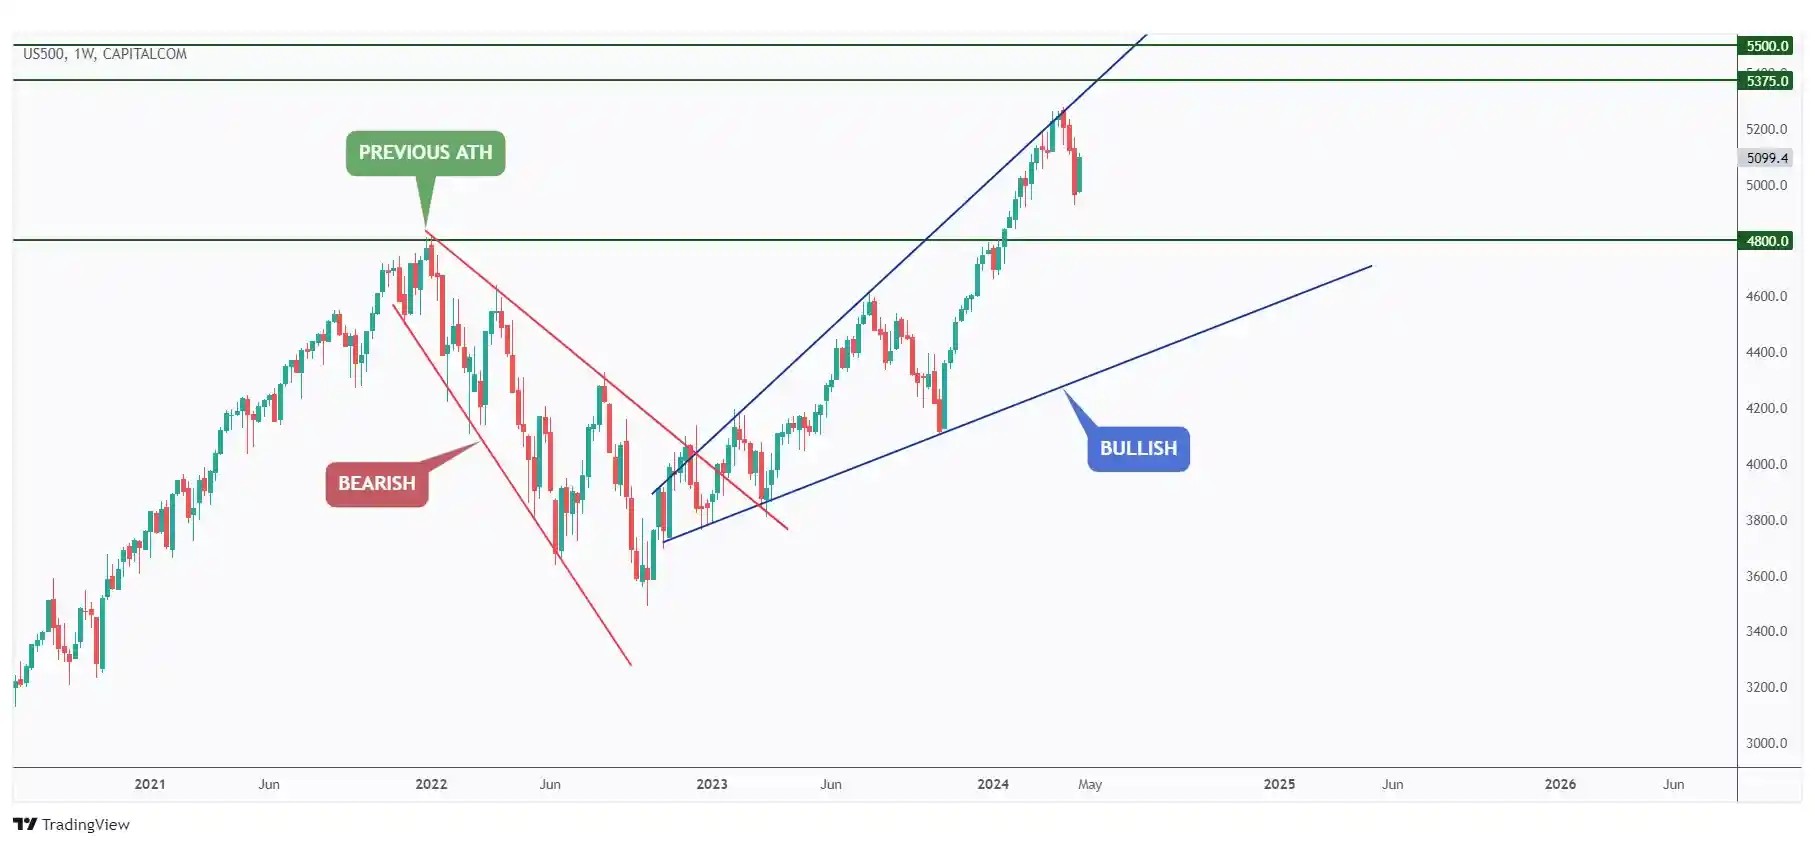 US500 weekly chart rejecting the upper bound of the wedge pattern and currently approaching the $4800.